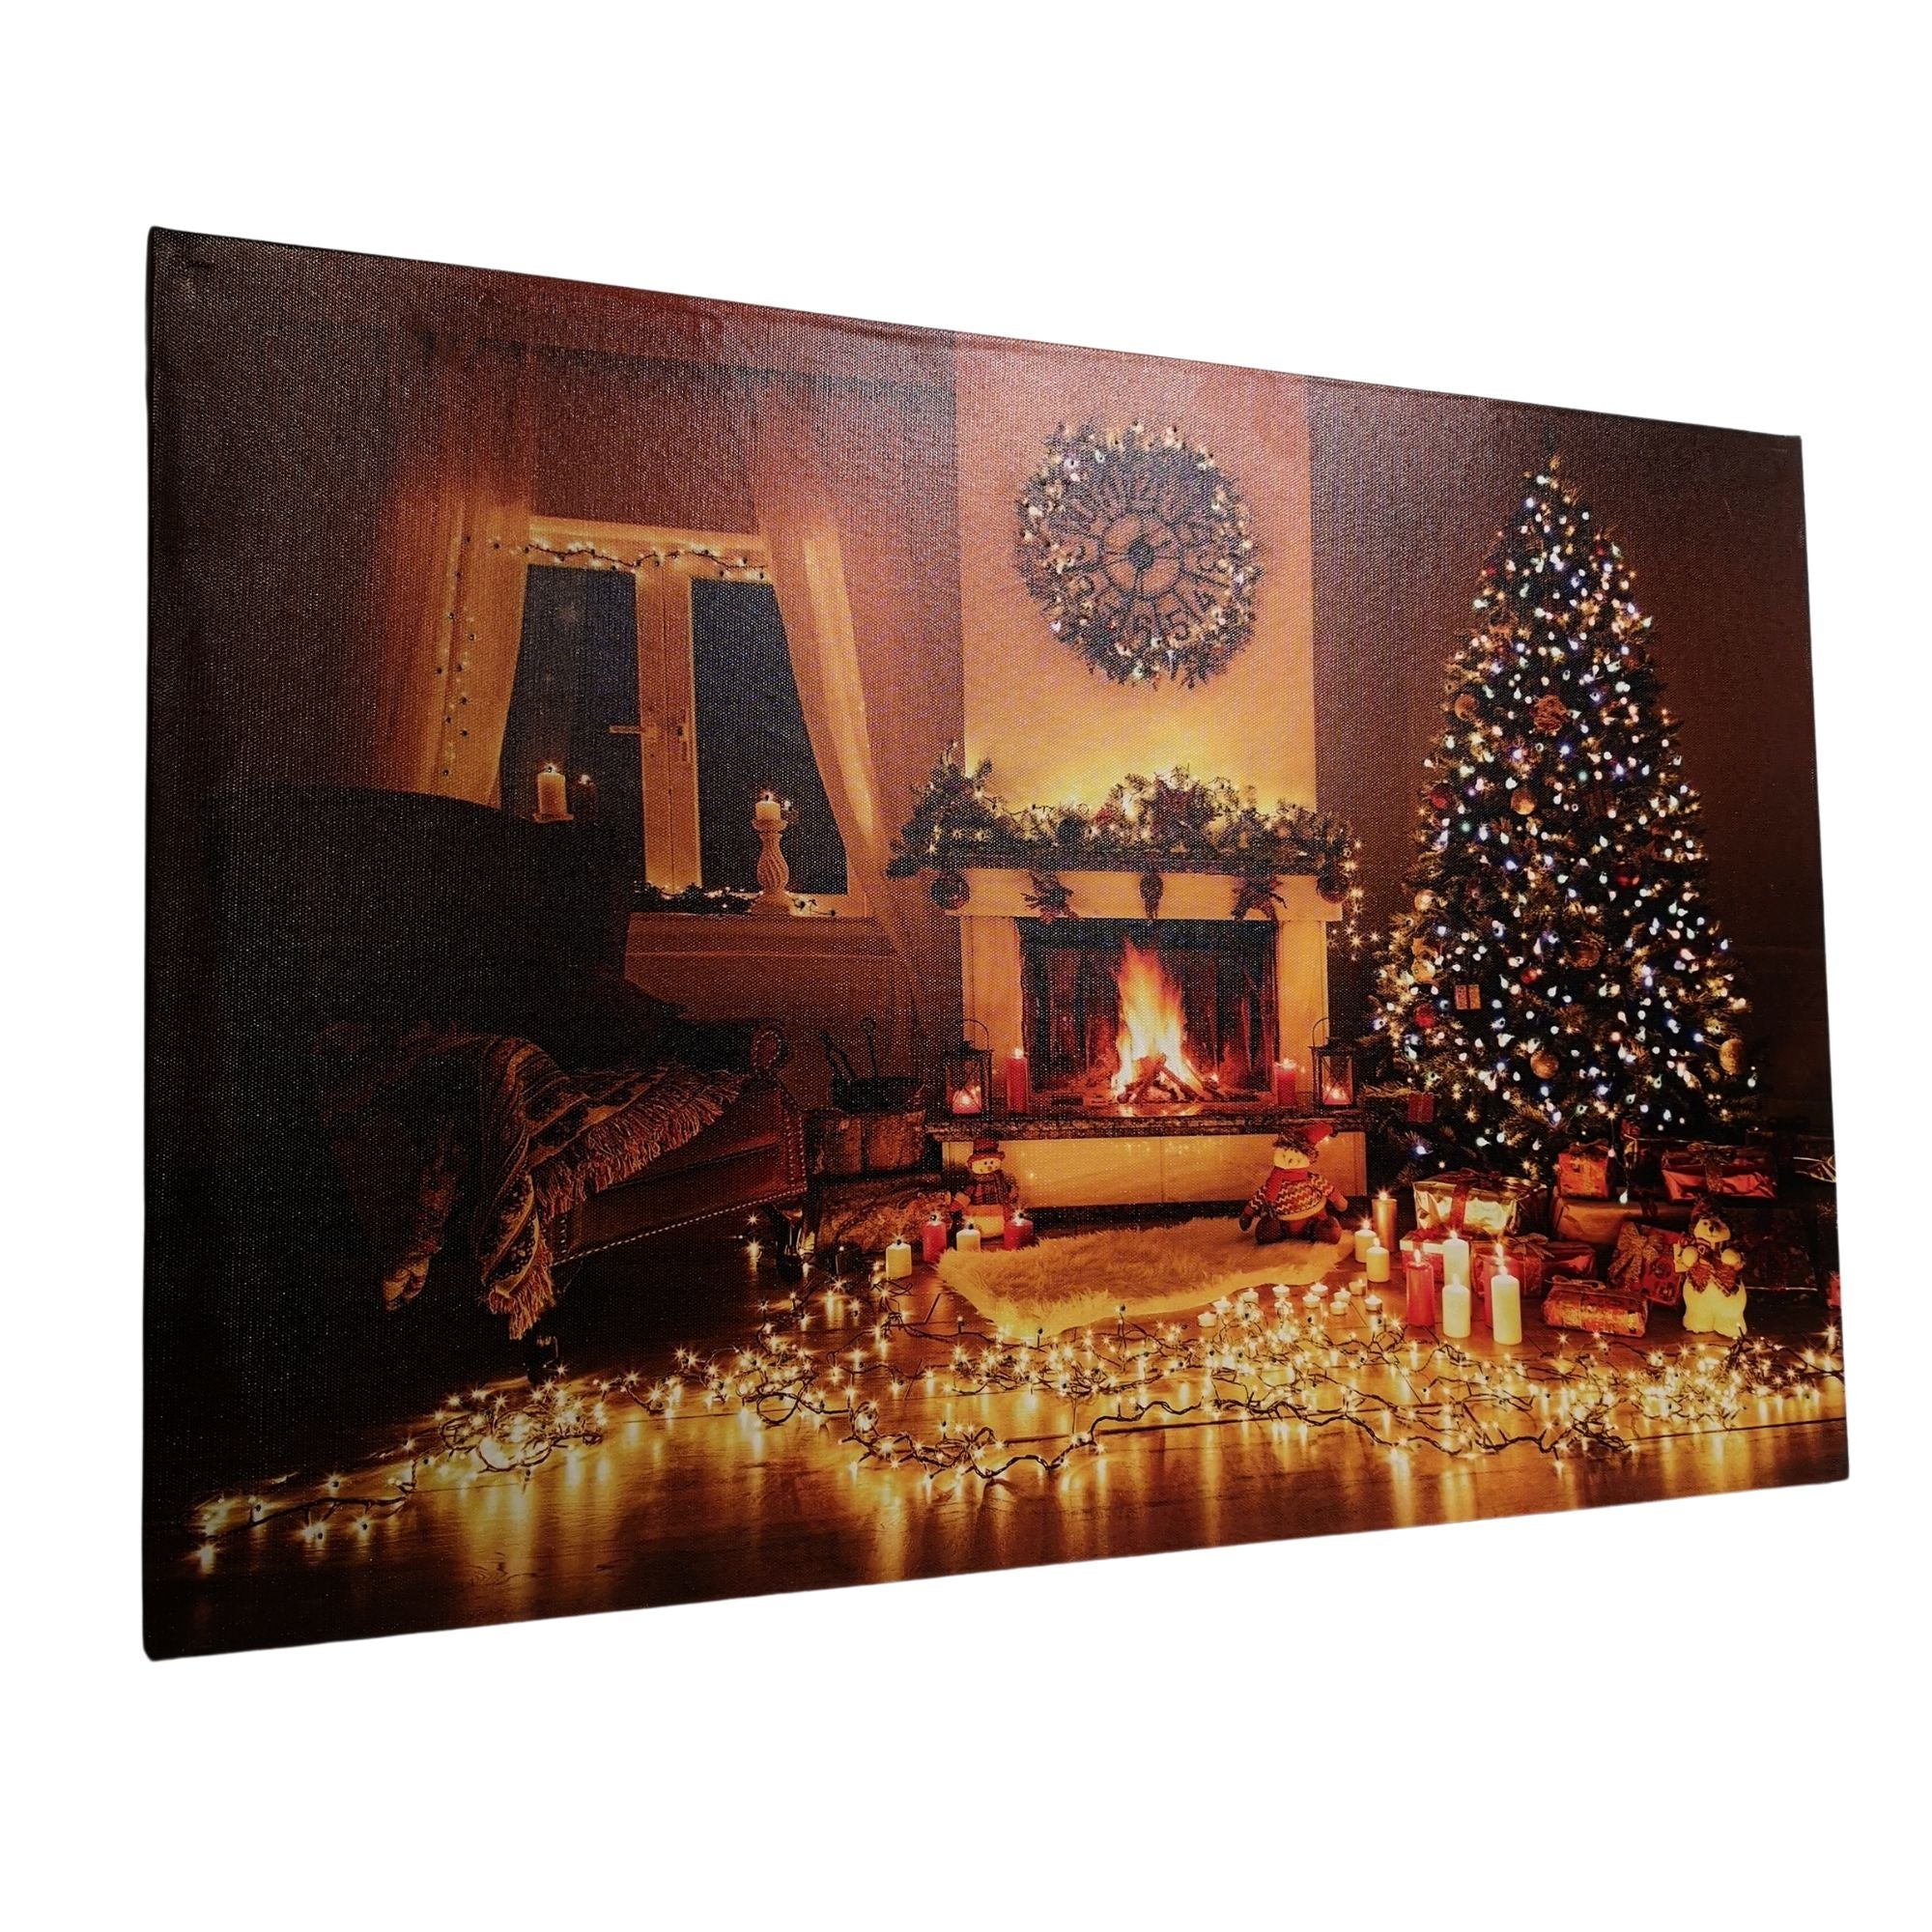 40 x 60cm Fibre Optic Wall Canvas with Christmas Tree Scene and Multicoloured LEDs